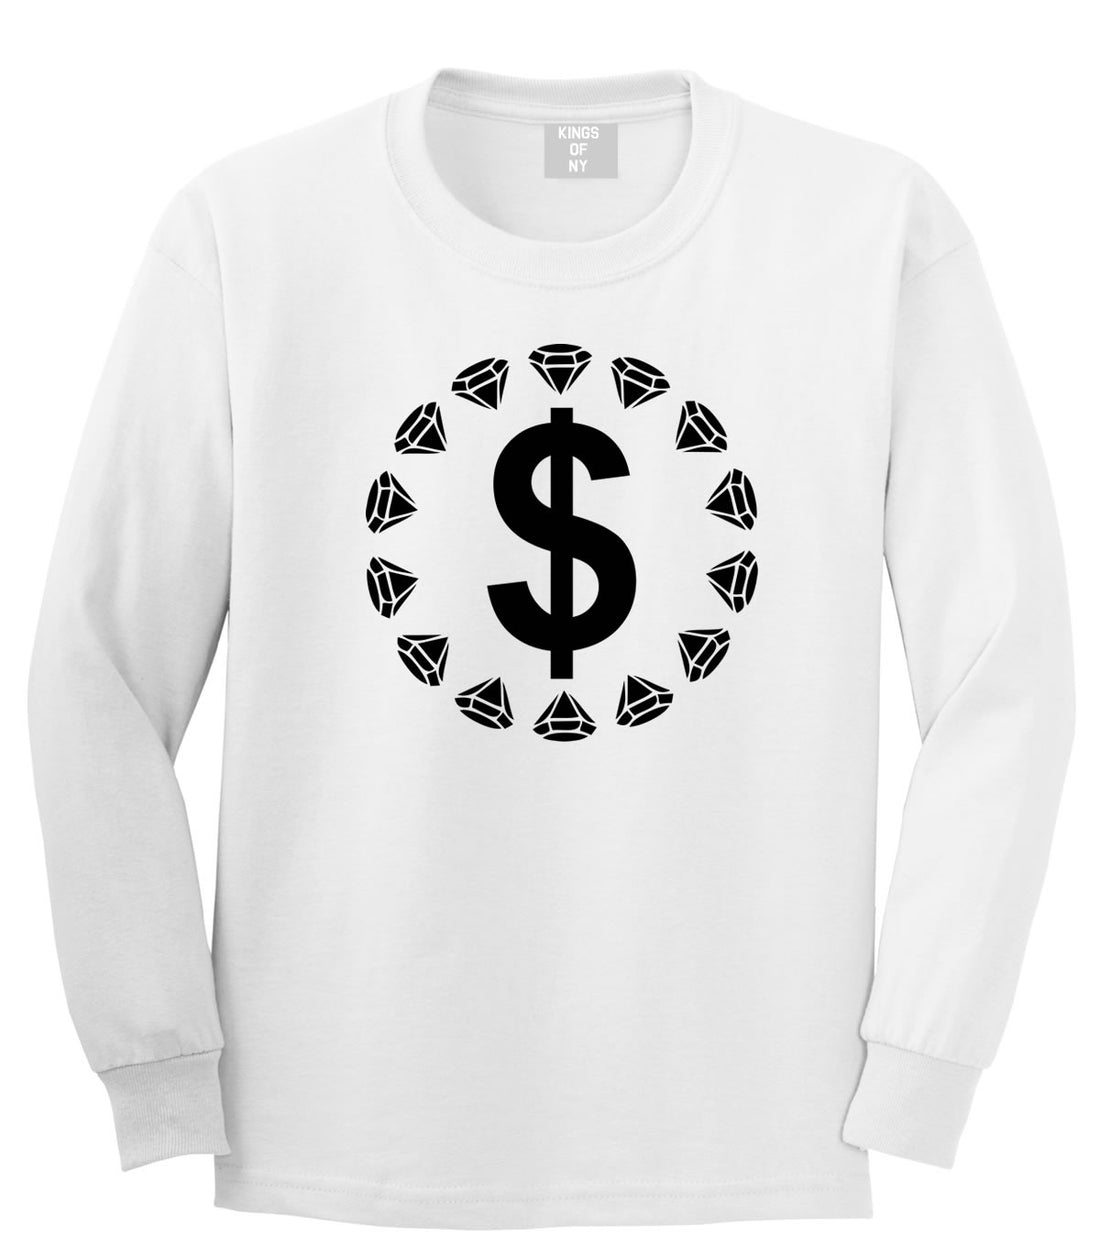 Diamonds Money Sign Logo Long Sleeve T-Shirt in White by Kings Of NY